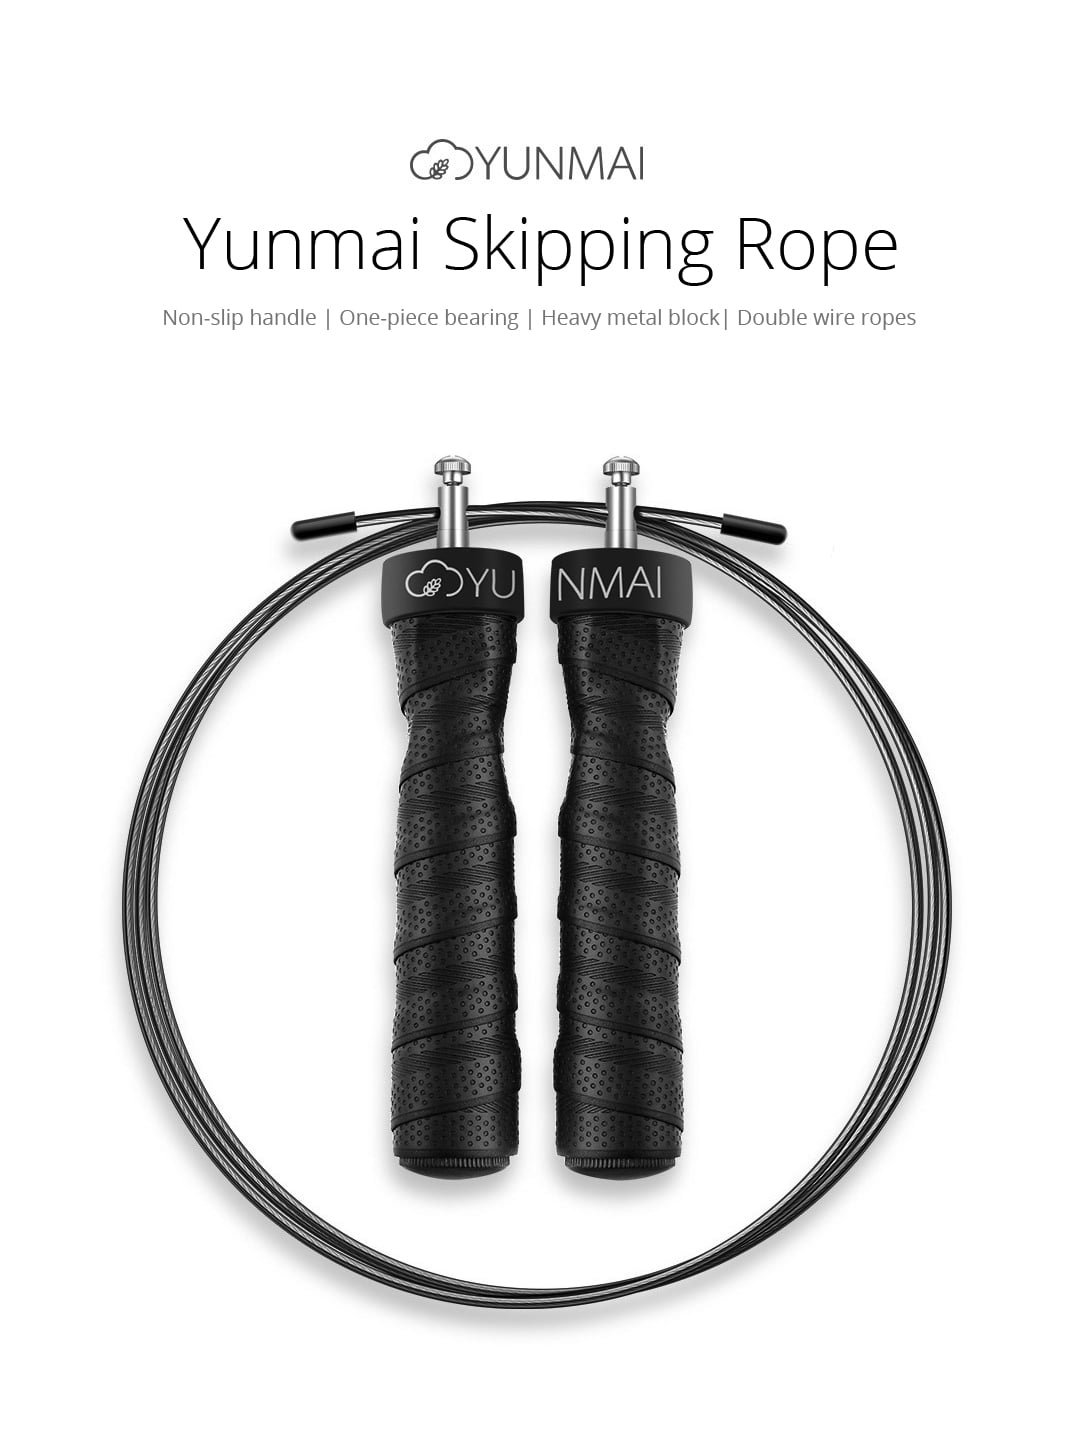 Yunmai Skipping Rope. Non-slip handle | One-piece bearing | Heavy metal block| Double wire ropes